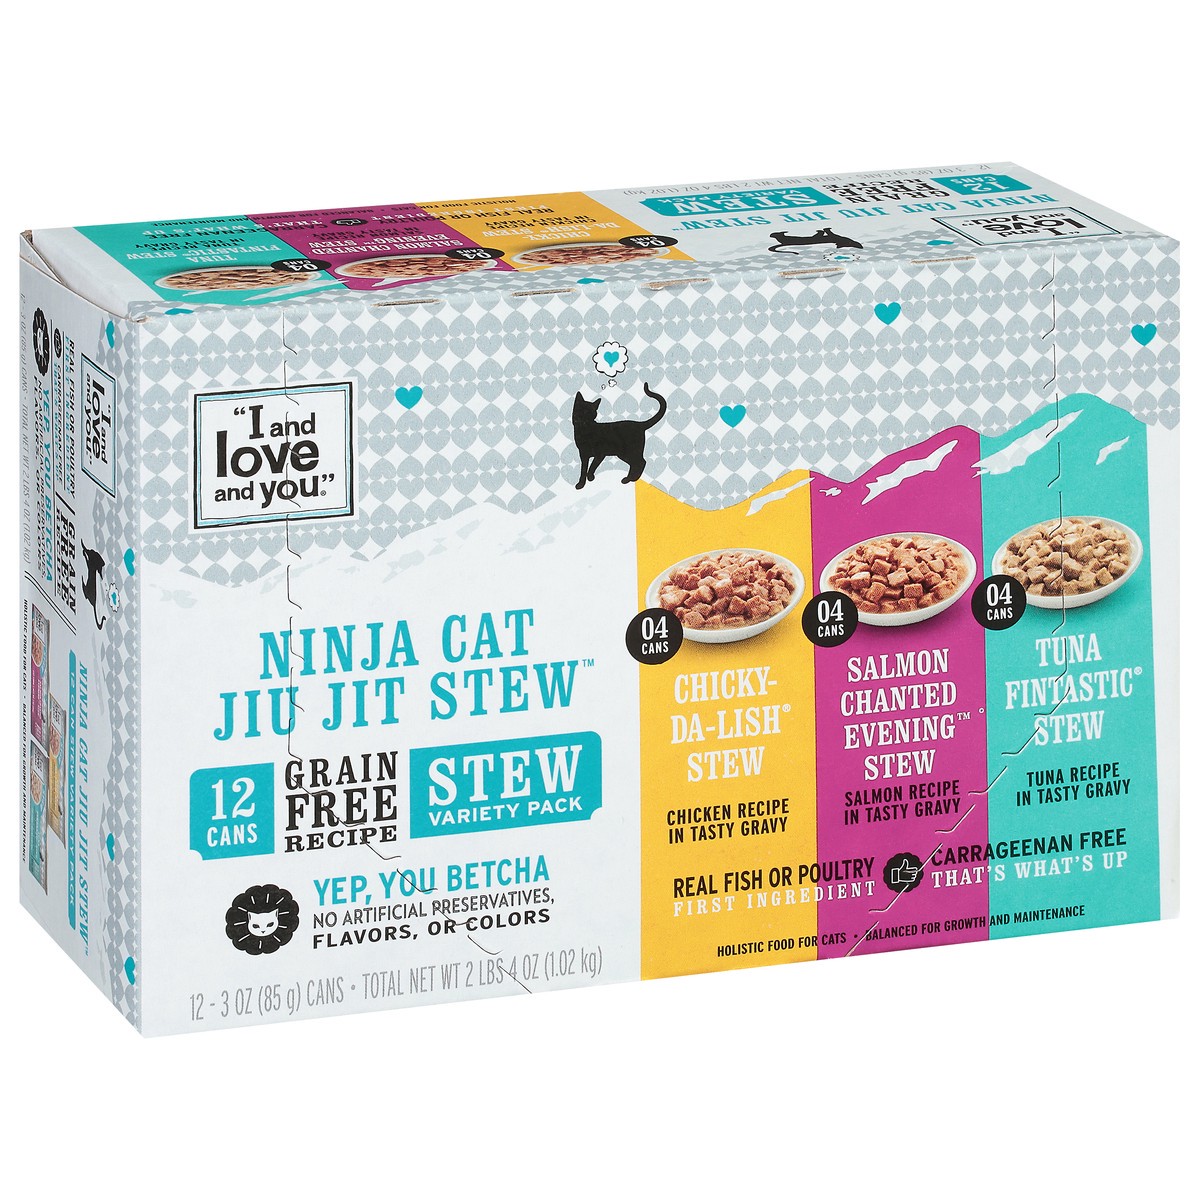 slide 4 of 13, I and Love and You Grain Free Recipe Ninja Cat Jiu Jit Stew Holistic Food for Cats Stew Variety Pack 12 - 3 oz Cans, 12 ct